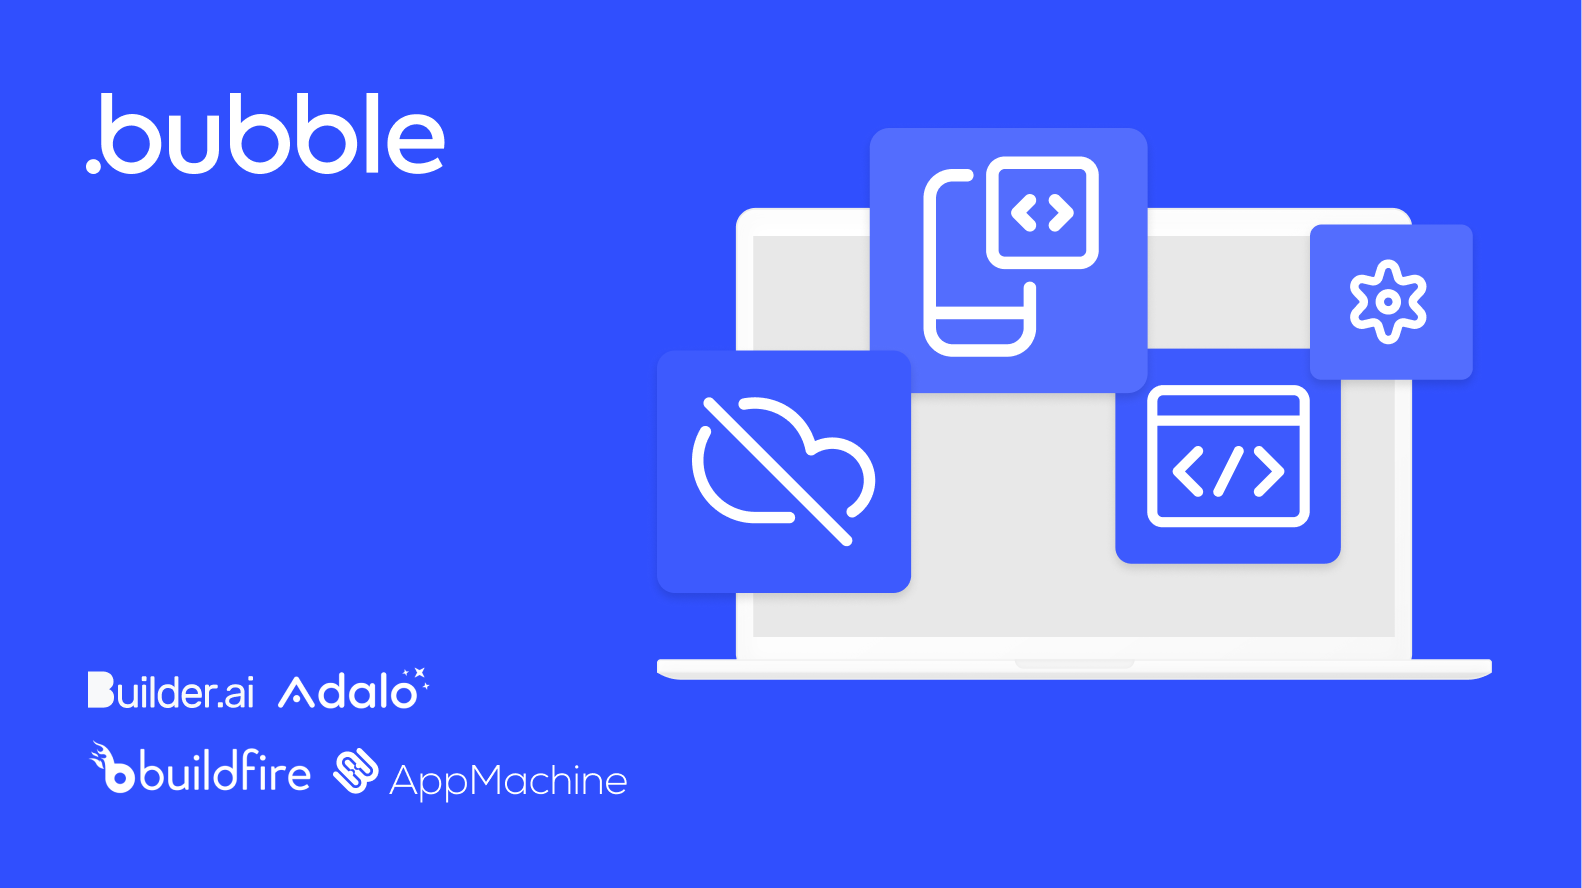 A concept illustrating the alternatives to Bubble.io depicting Builder.ai, Adalo, Buildfire and AppMachine